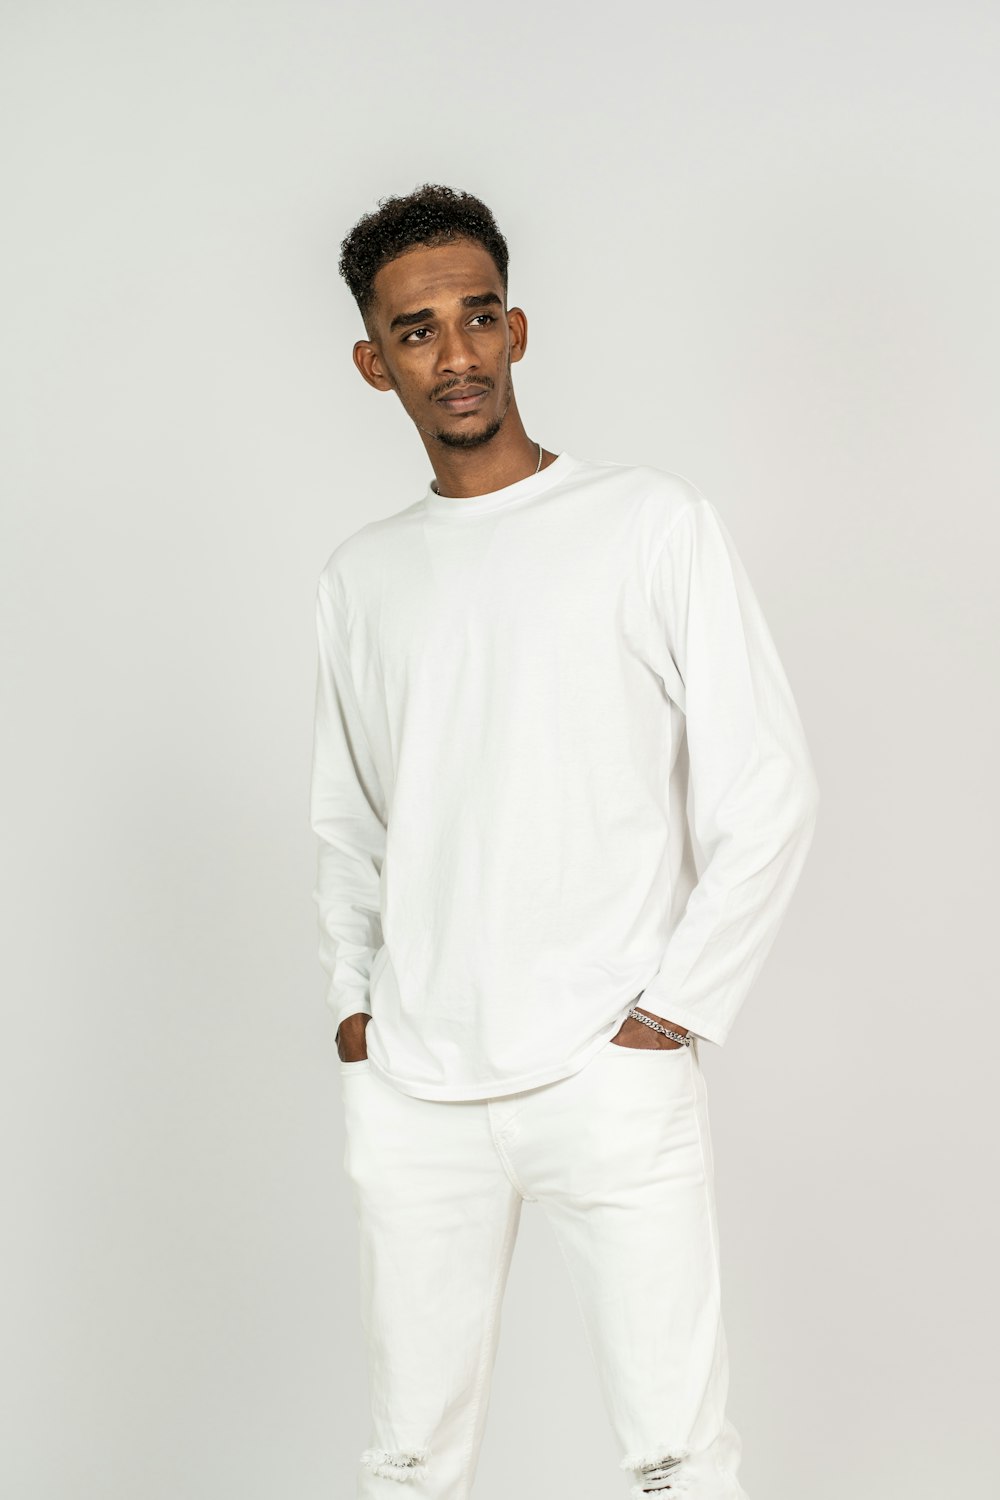 a man standing in a white shirt and jeans